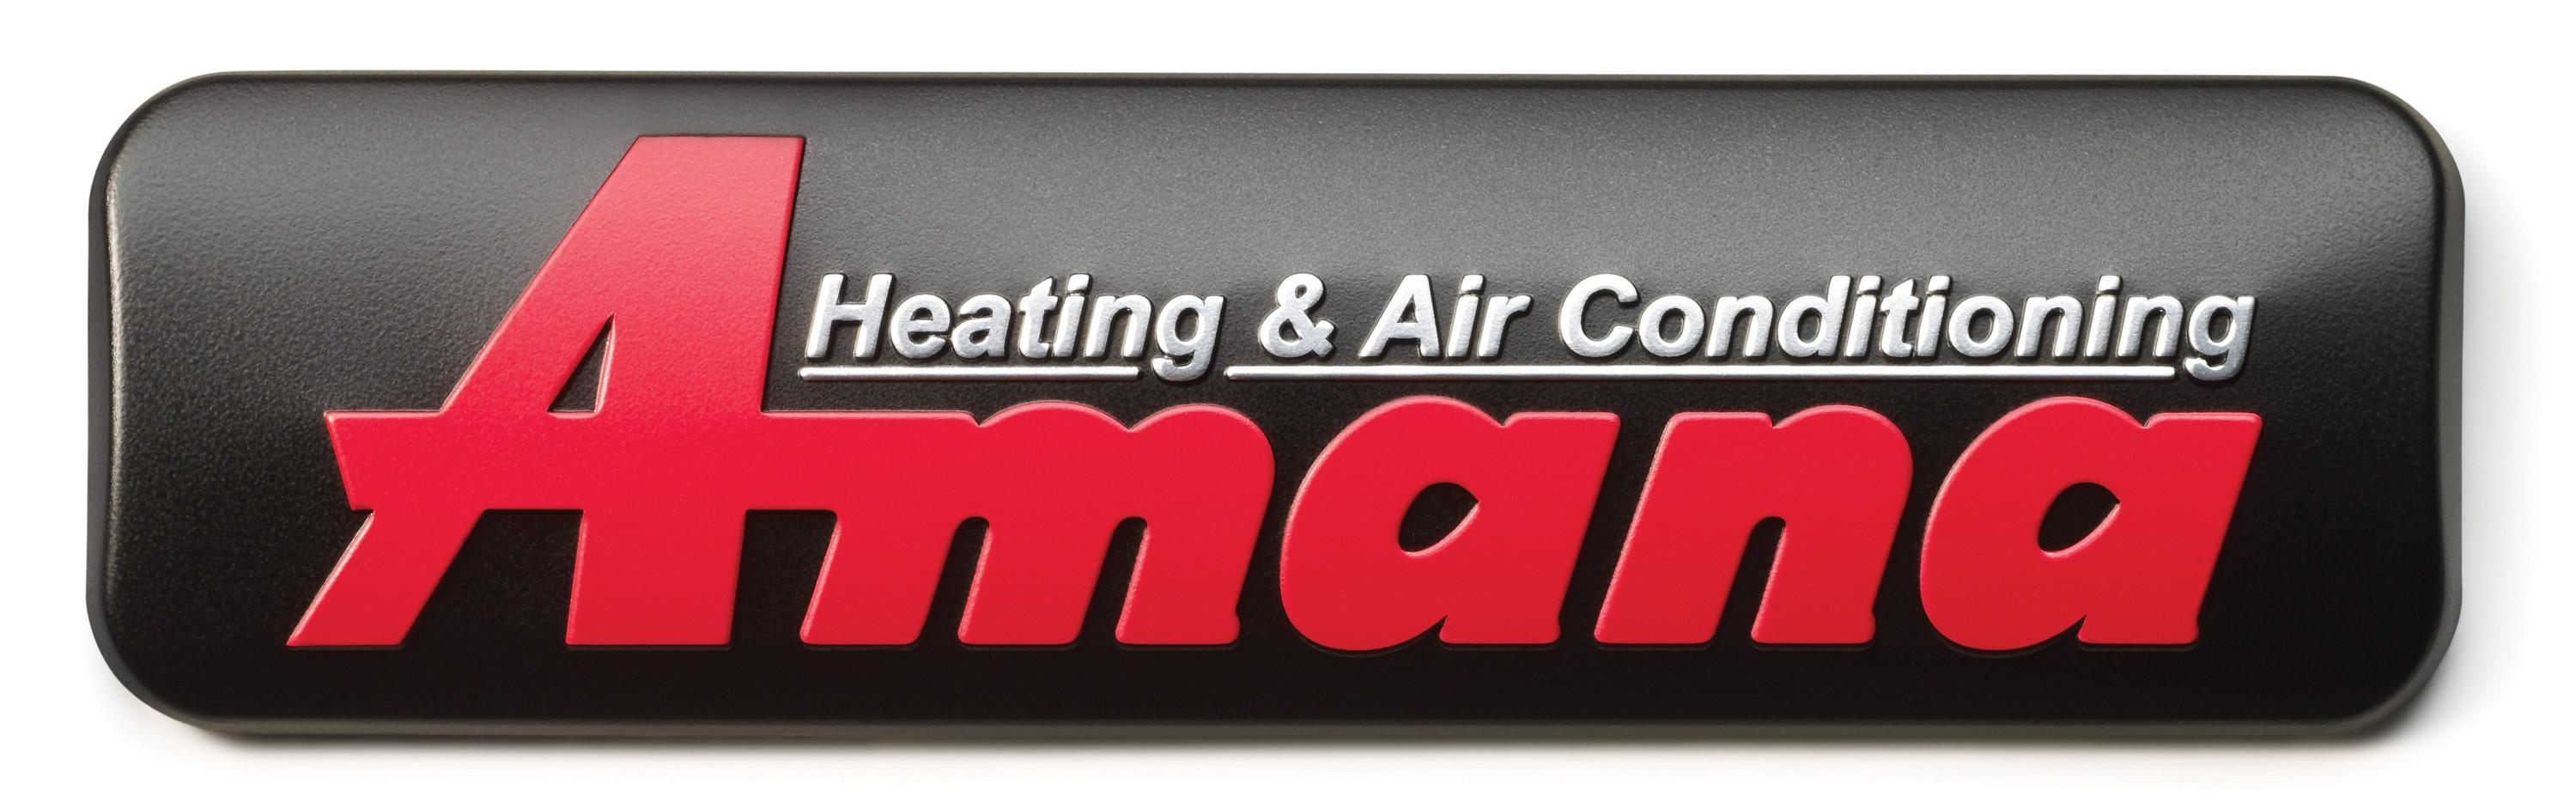 New Amana Logo - AMANA PRODUCTS | ACLV Heating & Air Conditioning